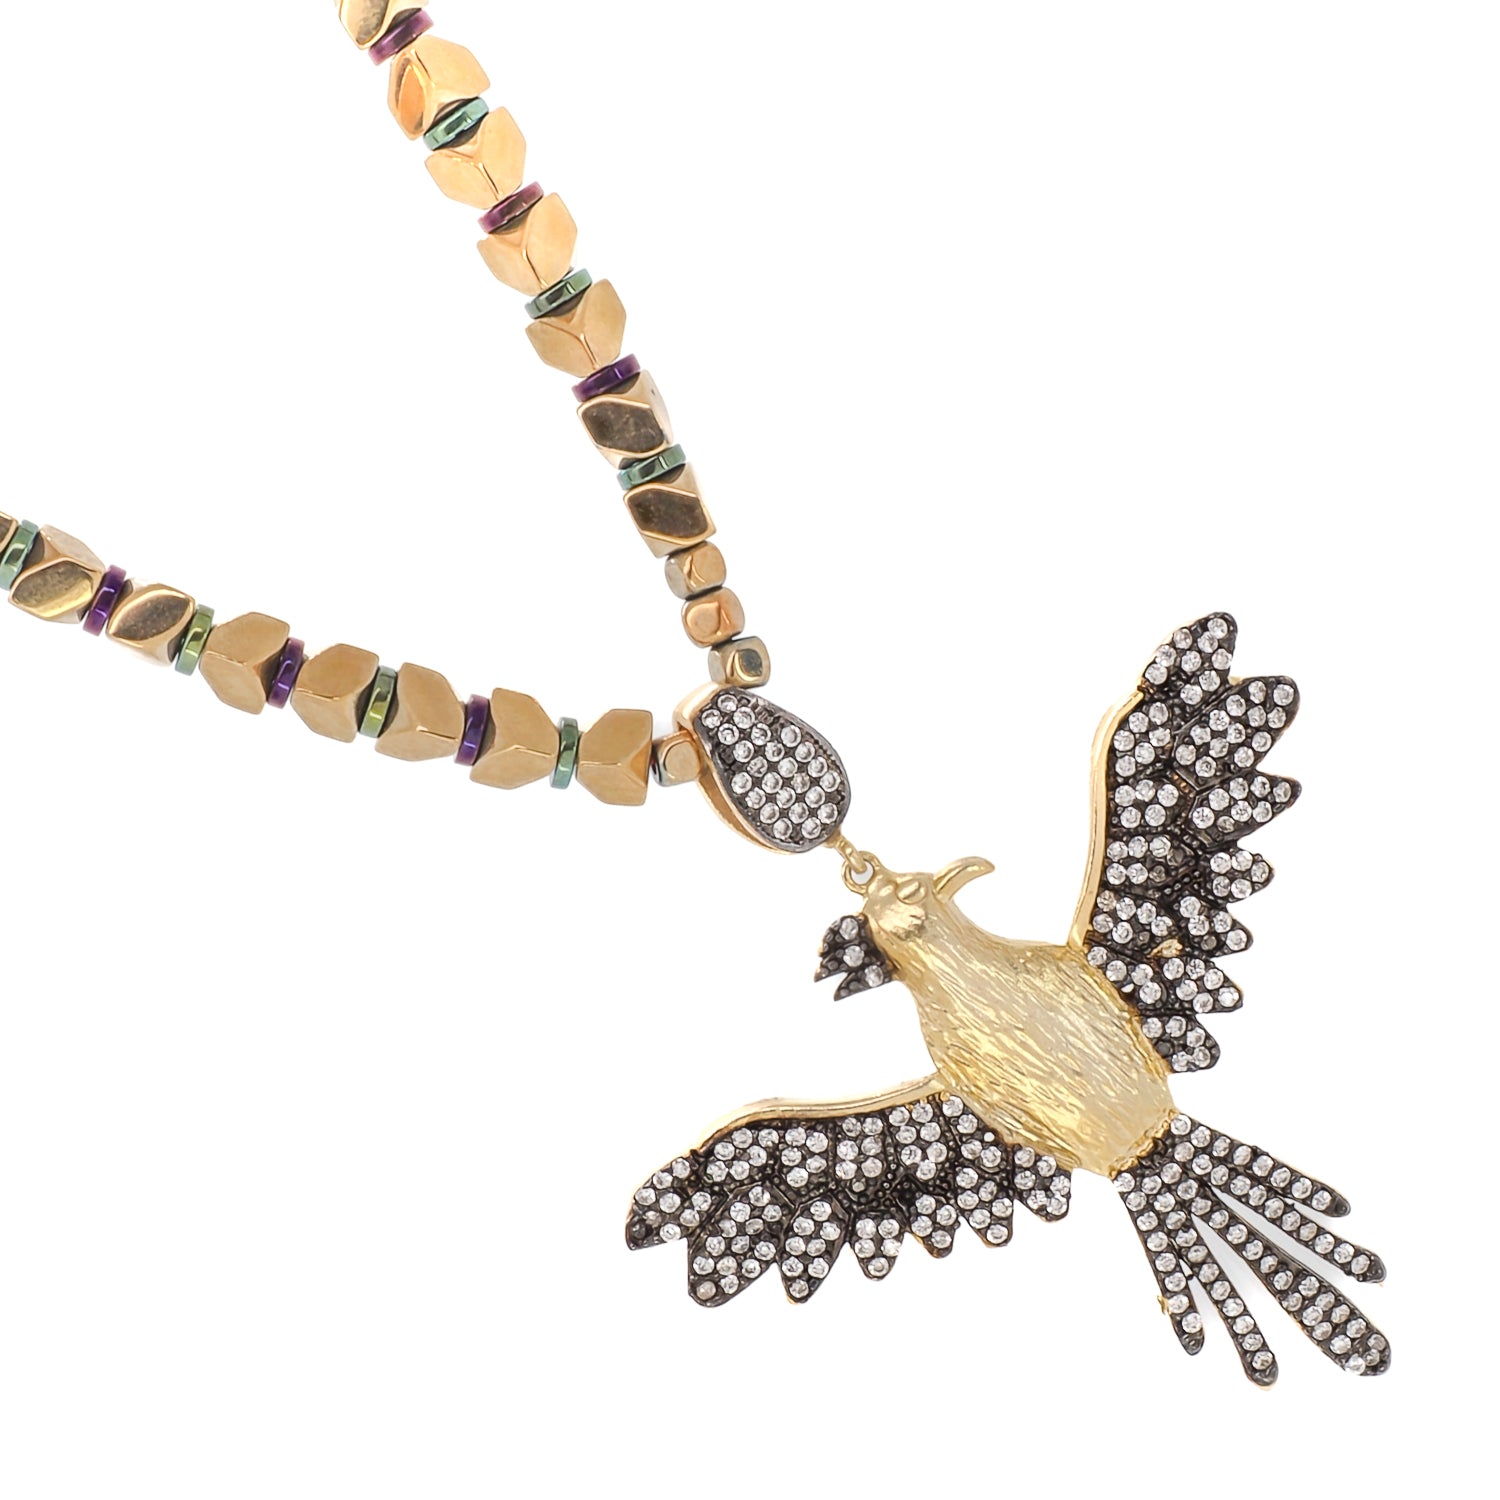 A stunning necklace featuring a mythical Phoenix bird pendant with sparkling Swarovski crystals.